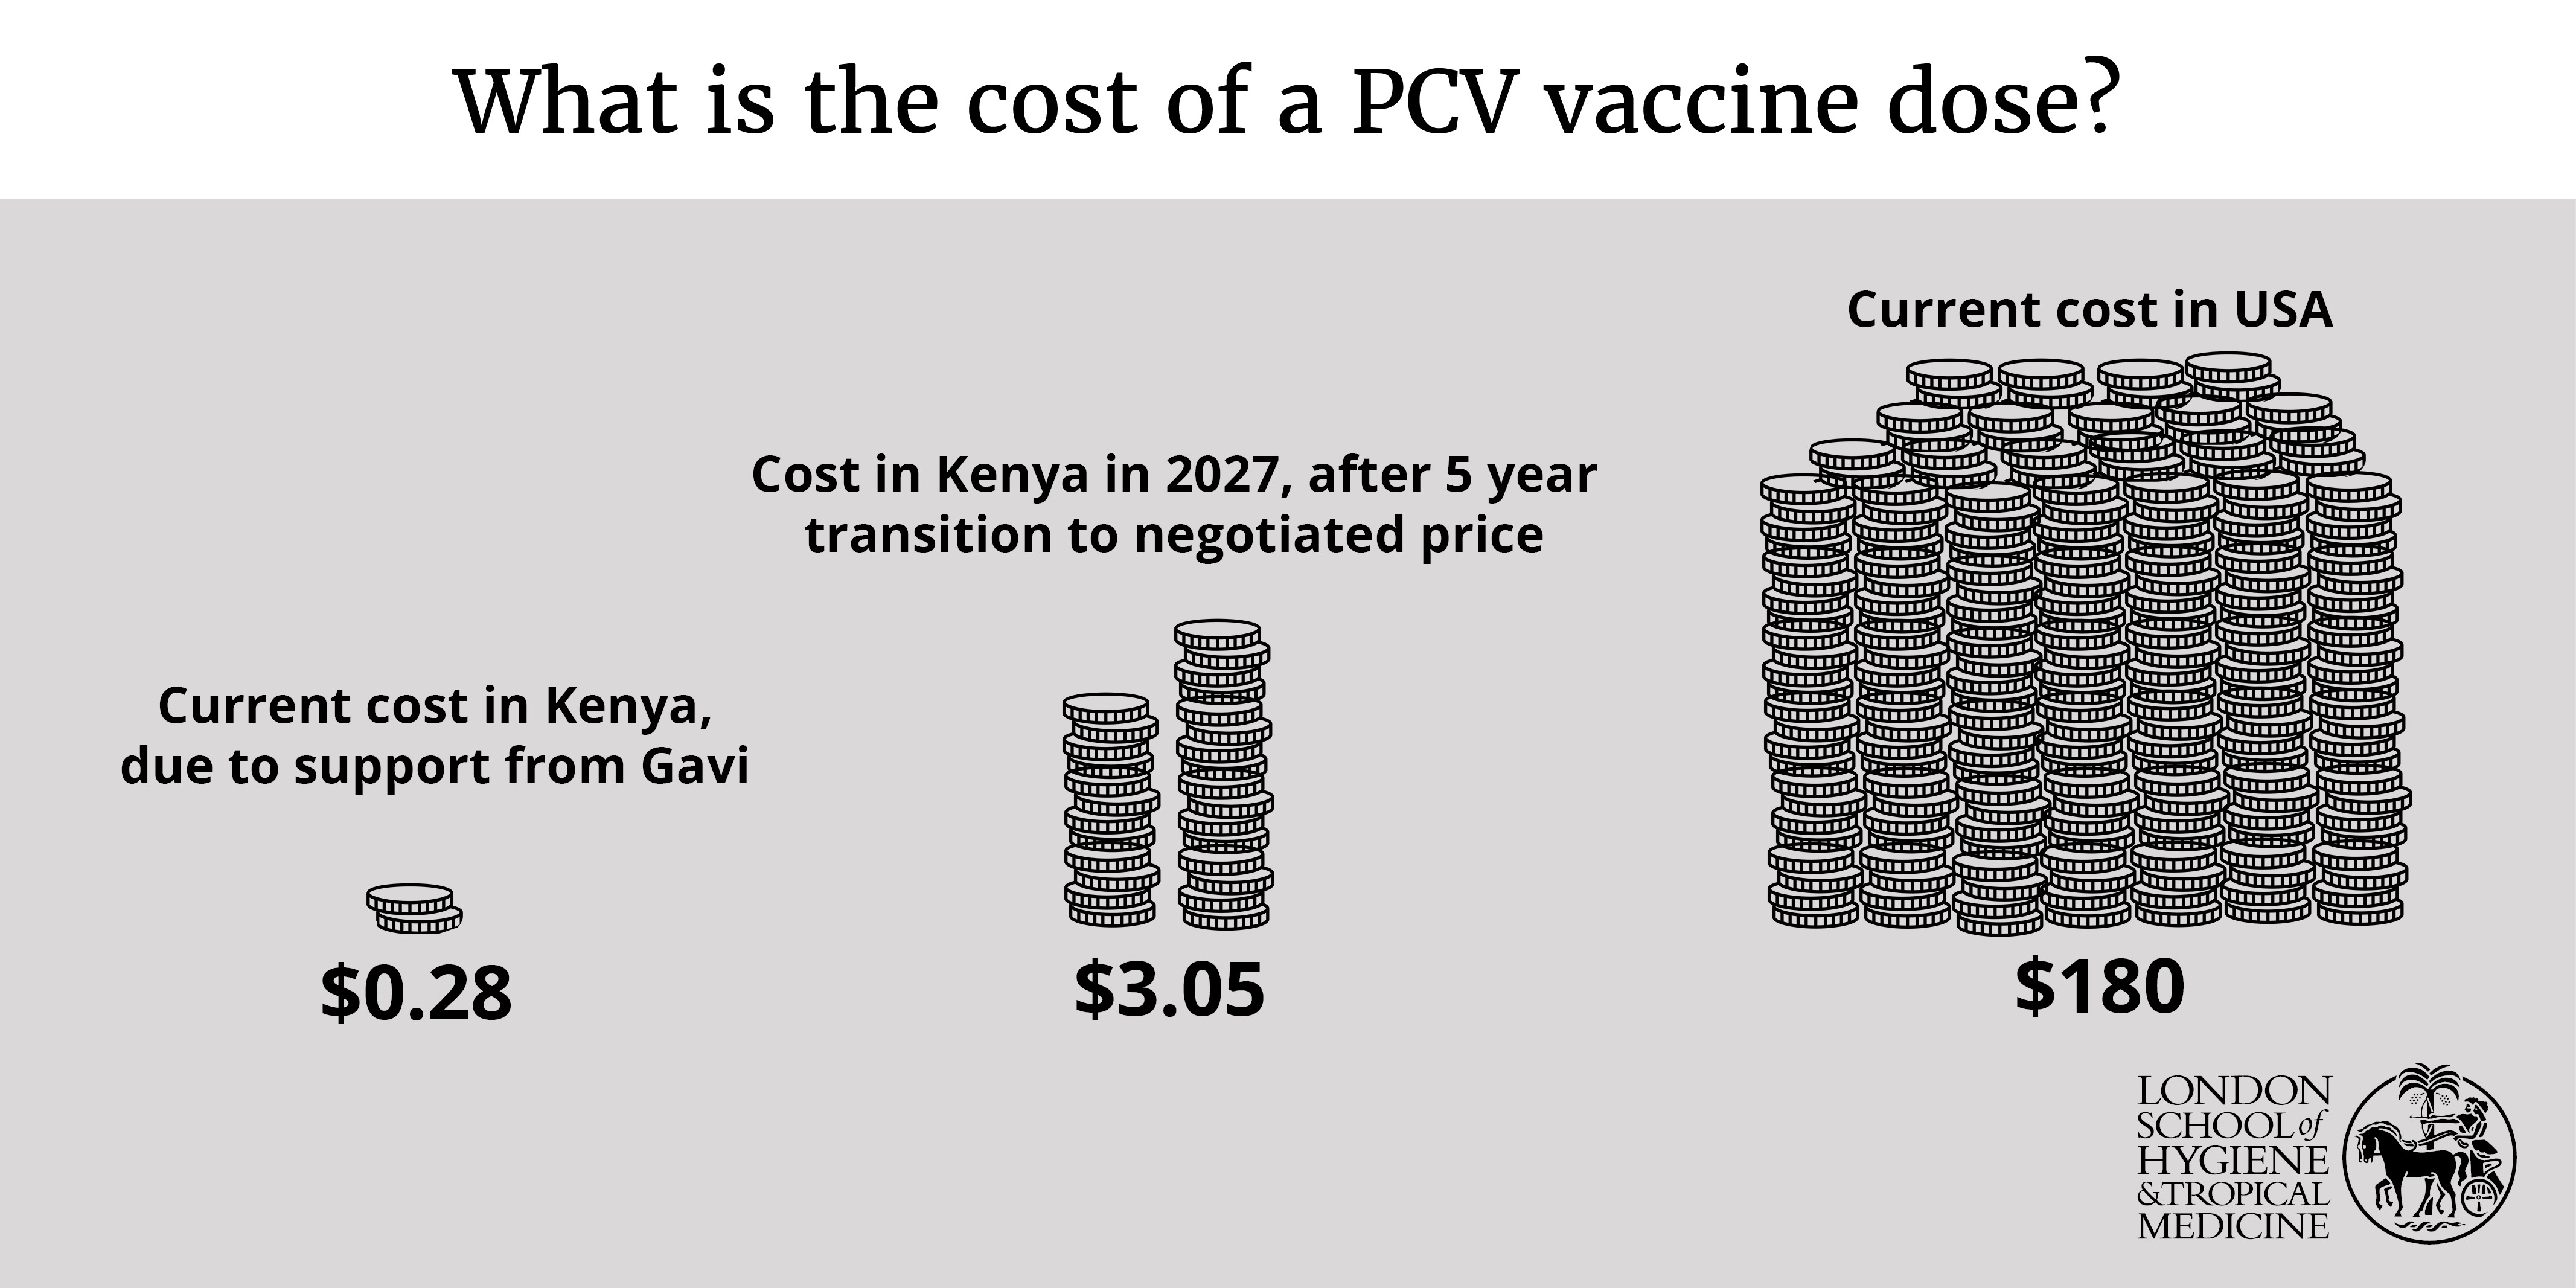 What is the cost of a PCV vaccine dose?